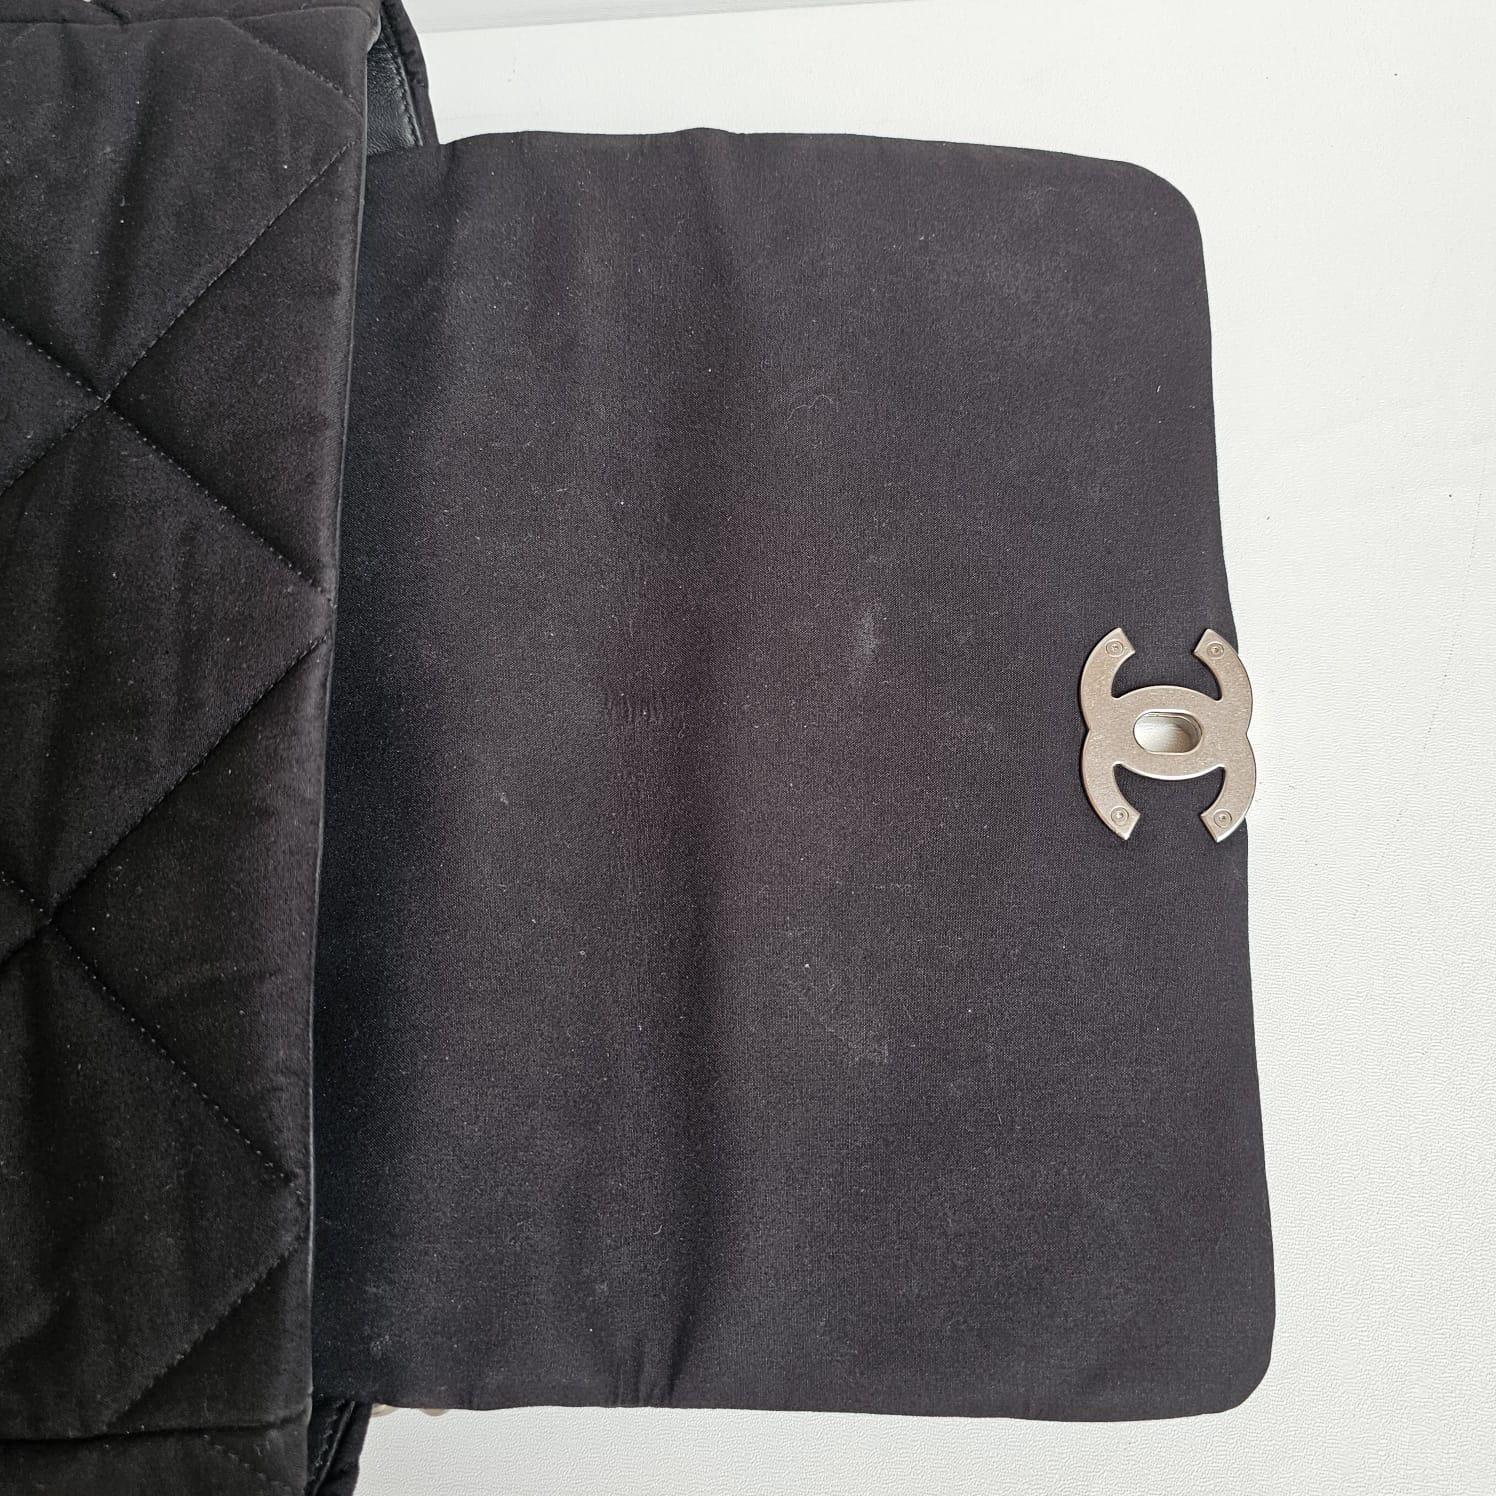 Chanel C19 Large Black Canvas Quilted Flap Bag In Good Condition For Sale In Jakarta, Daerah Khusus Ibukota Jakarta